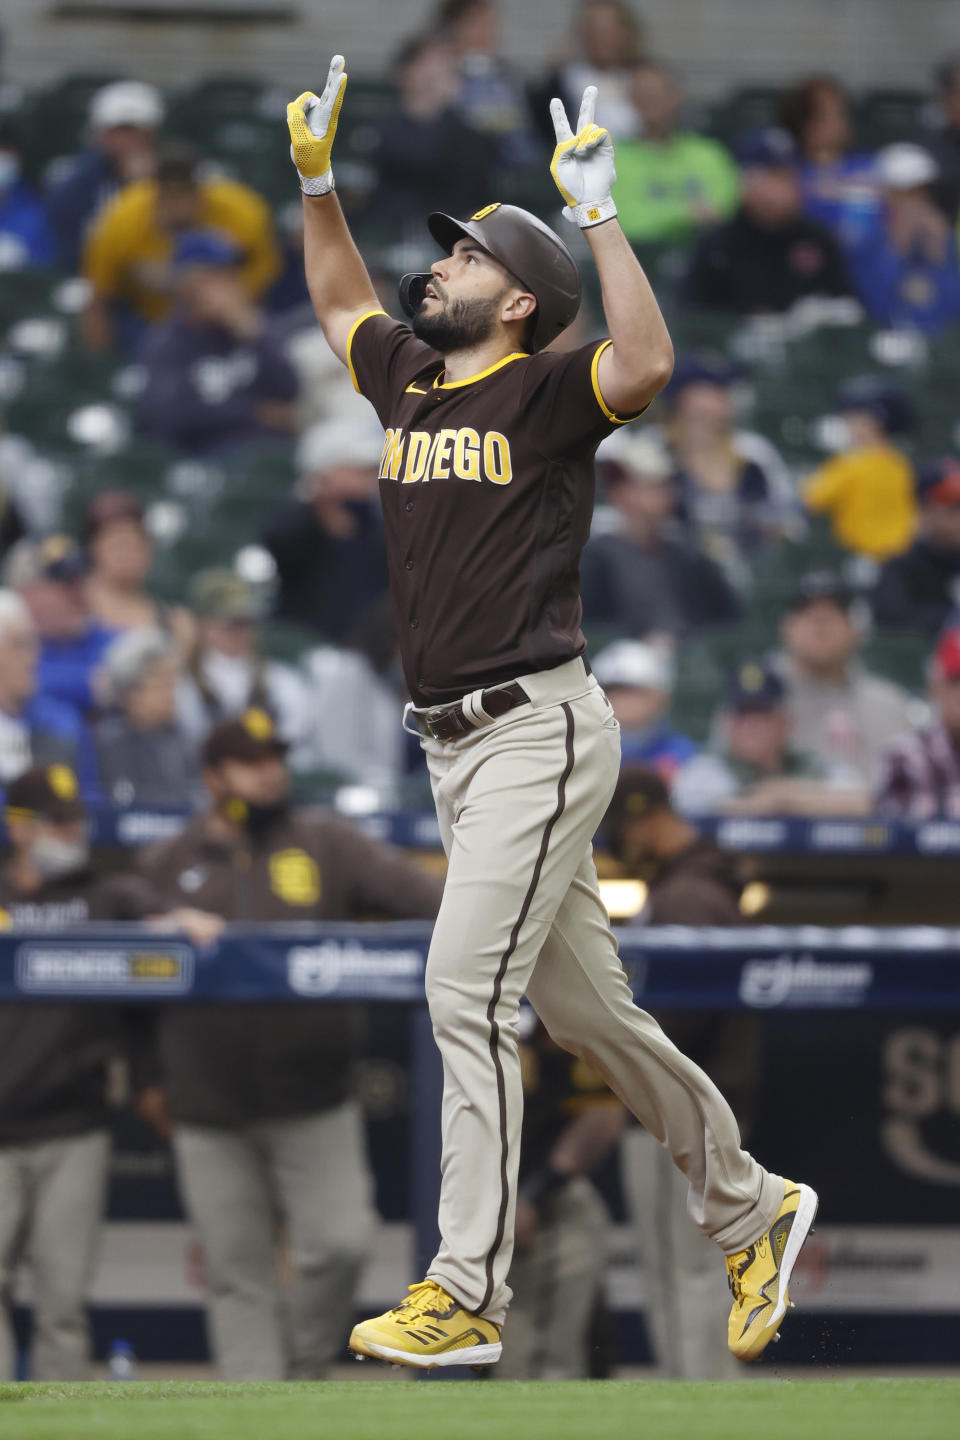 San Diego Padres' Eric Hosmer reacts after hitting a two-run home in the sixth inning of a baseball game against the Milwaukee Brewers, Thursday, May 27, 2021, in Milwaukee. (AP Photo/Jeffrey Phelps)